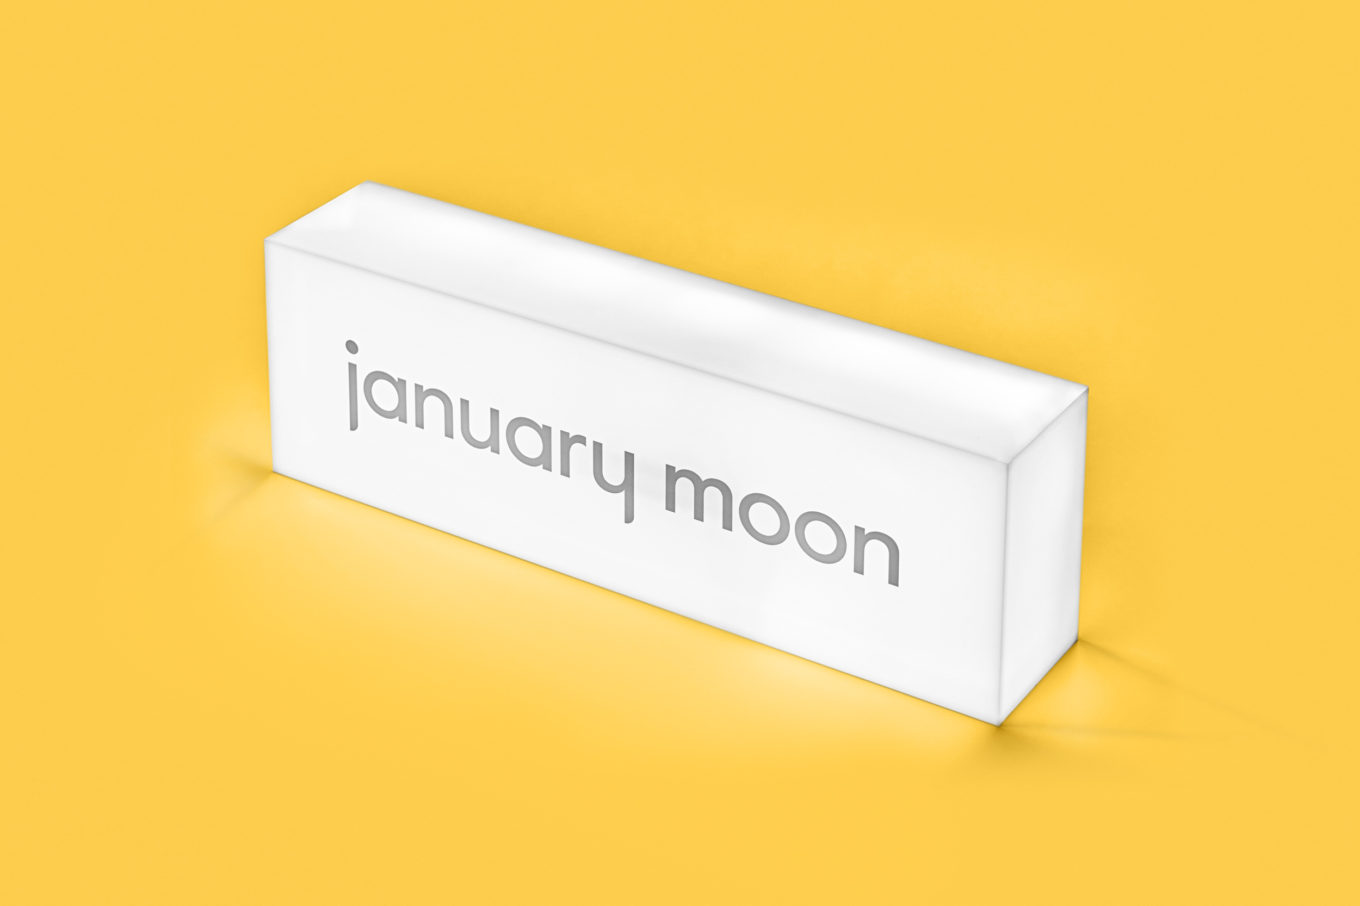 Logotype and illuminated signage for teething jewellery brand January Moon by Perky Bros